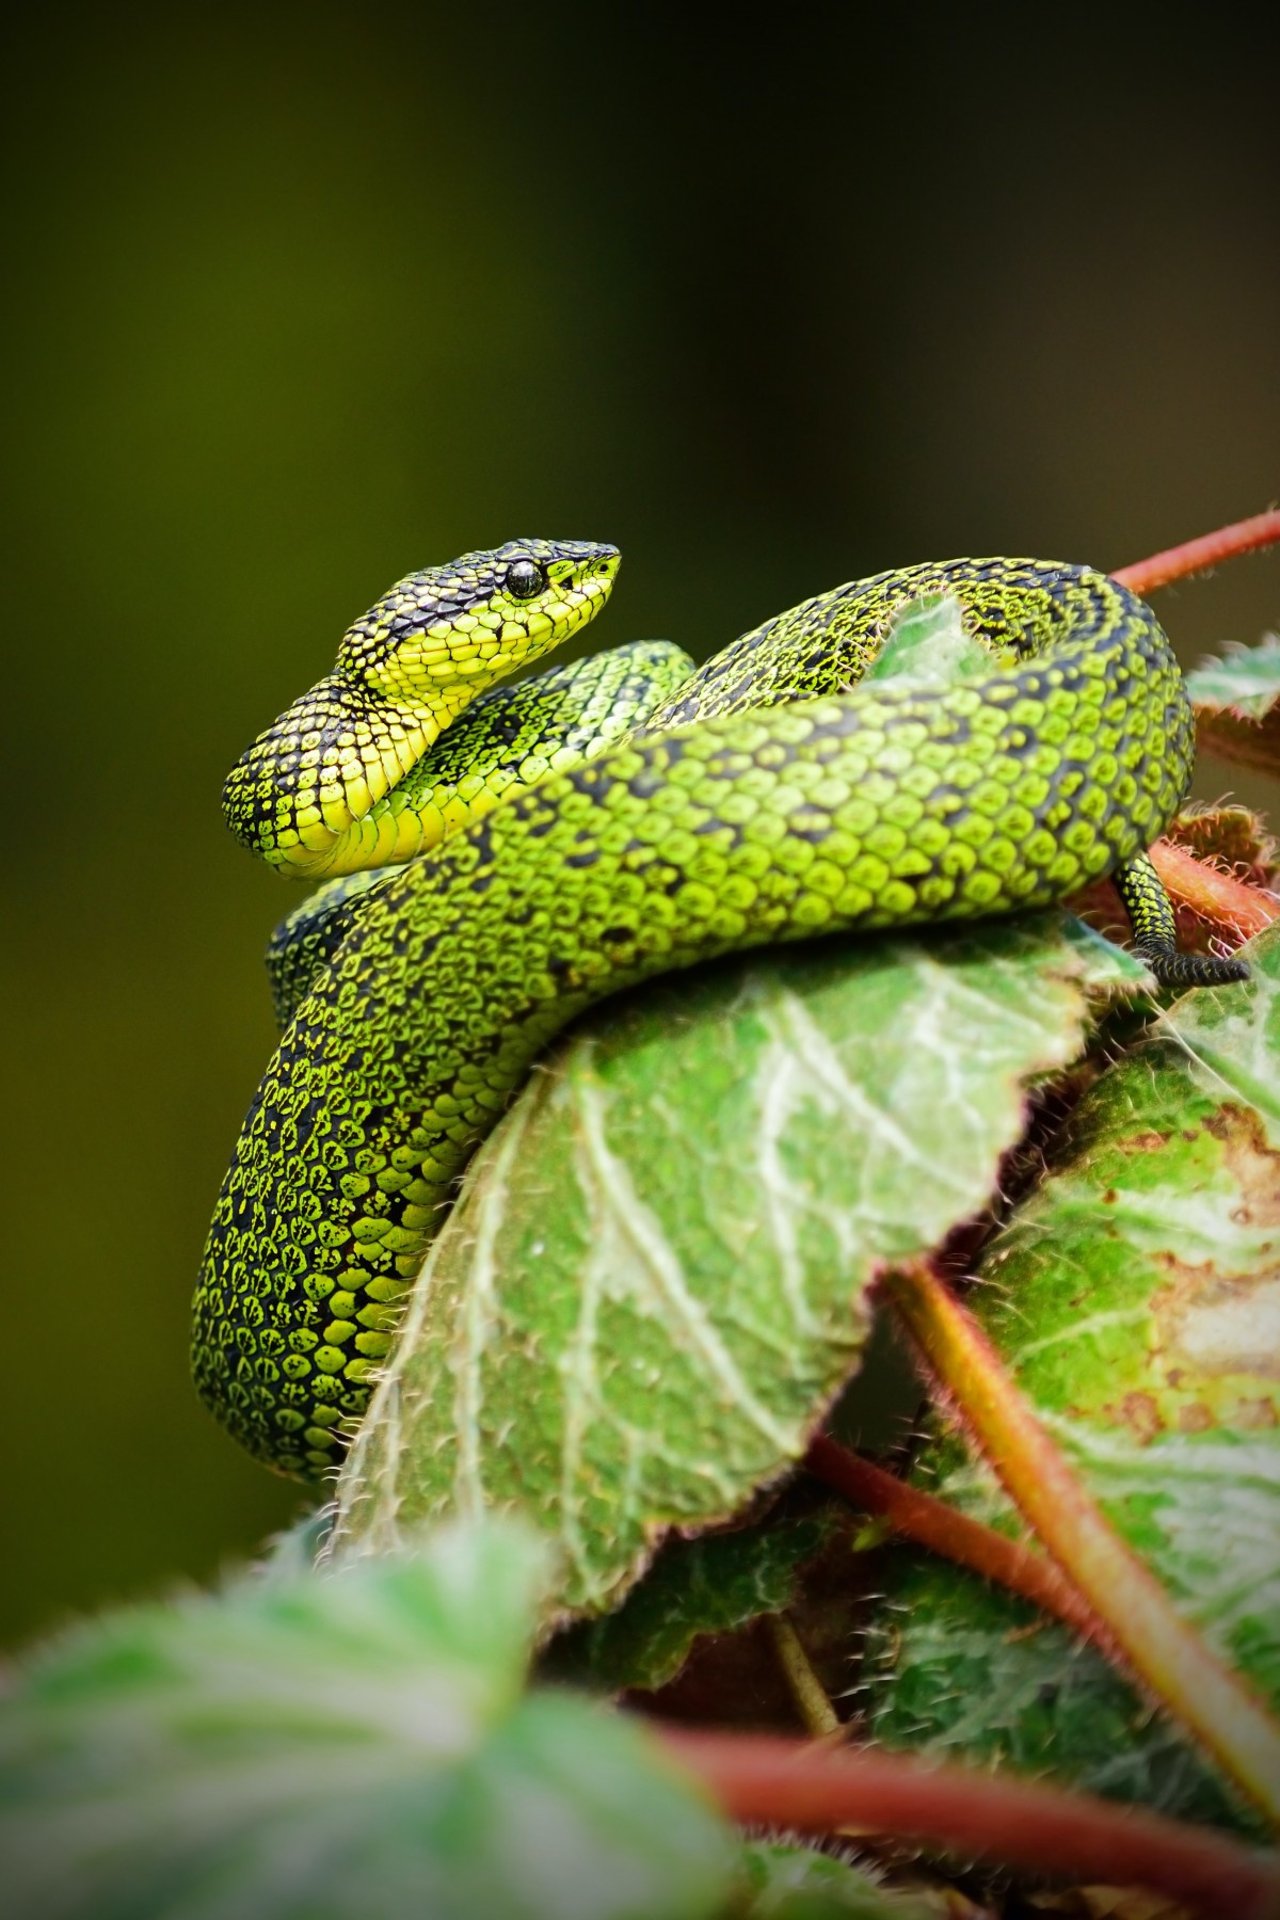 A green snake on a branch